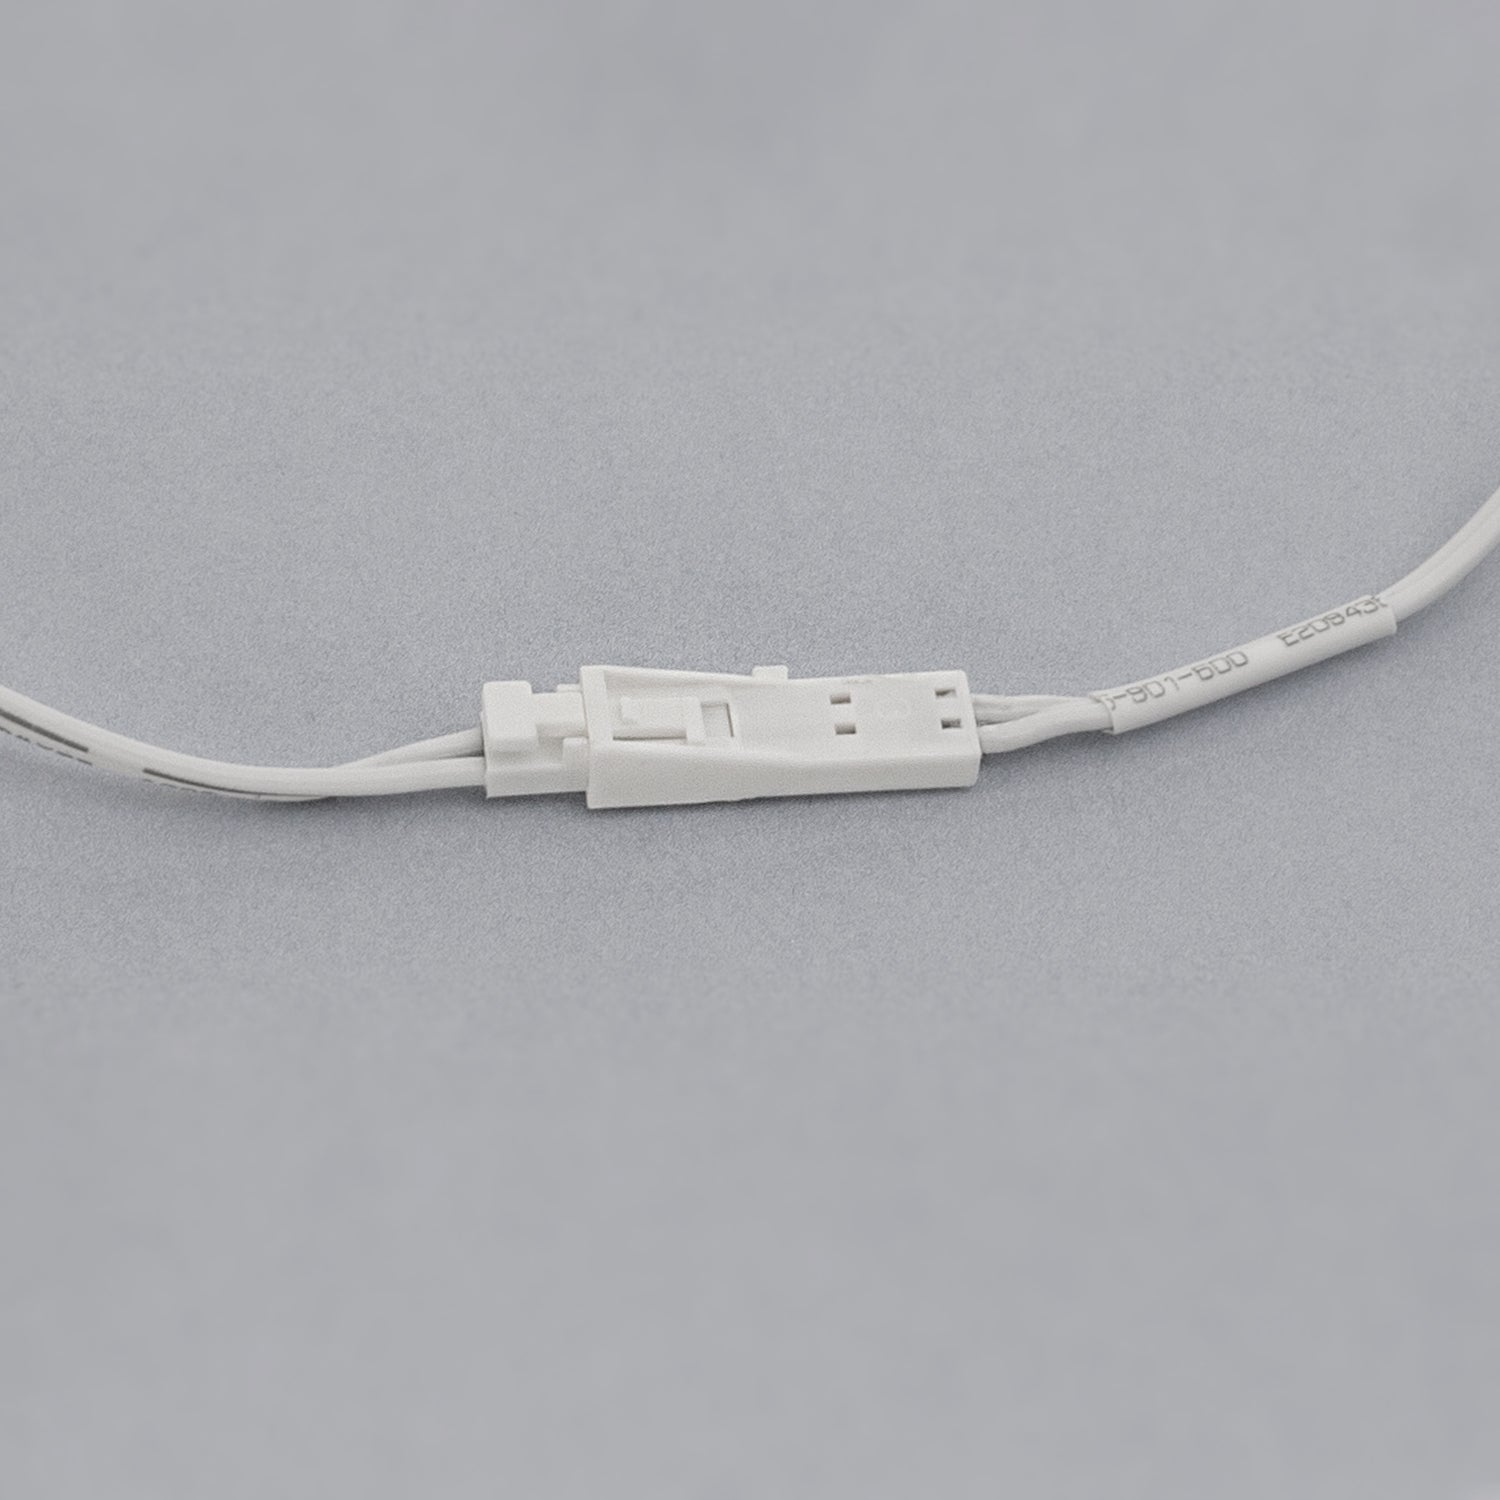 VBD-LR-2P Wire to Wire Connector 1 Meter (39in) - Veroboard 